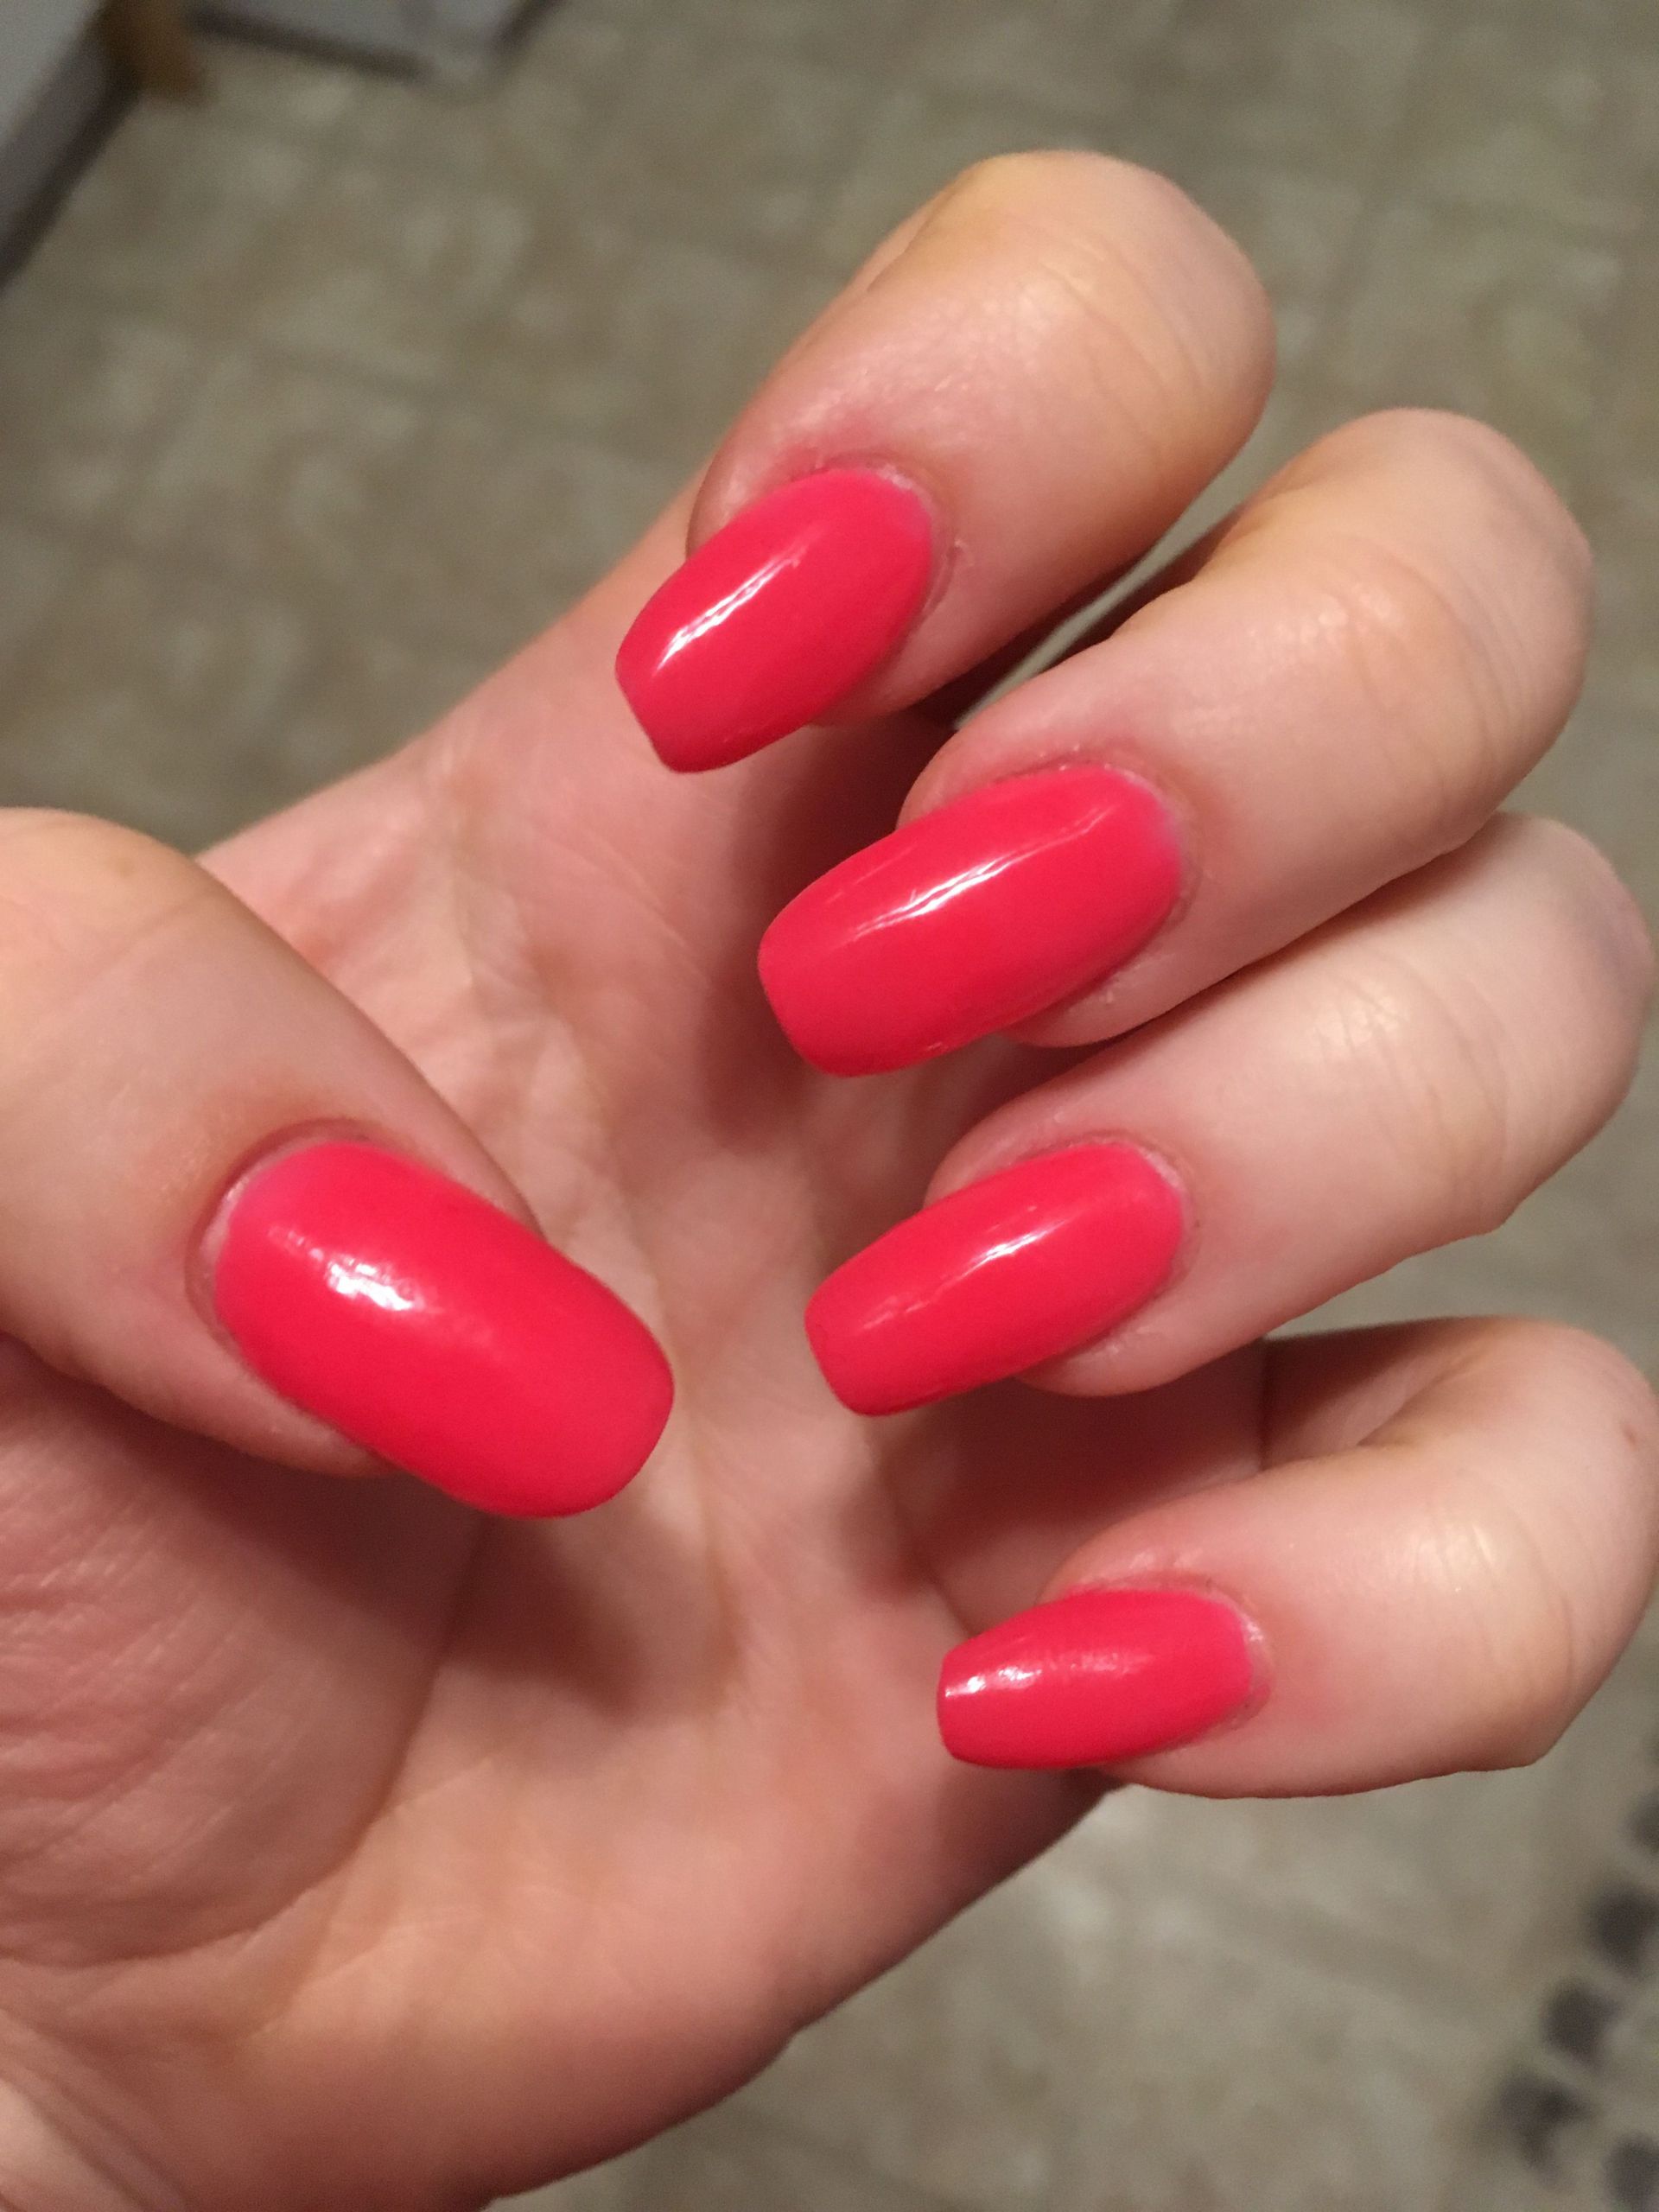 Dip Powder Nail Colors
 ASP "Passionate Pink" from the ASP Color Acrylic Quick Dip